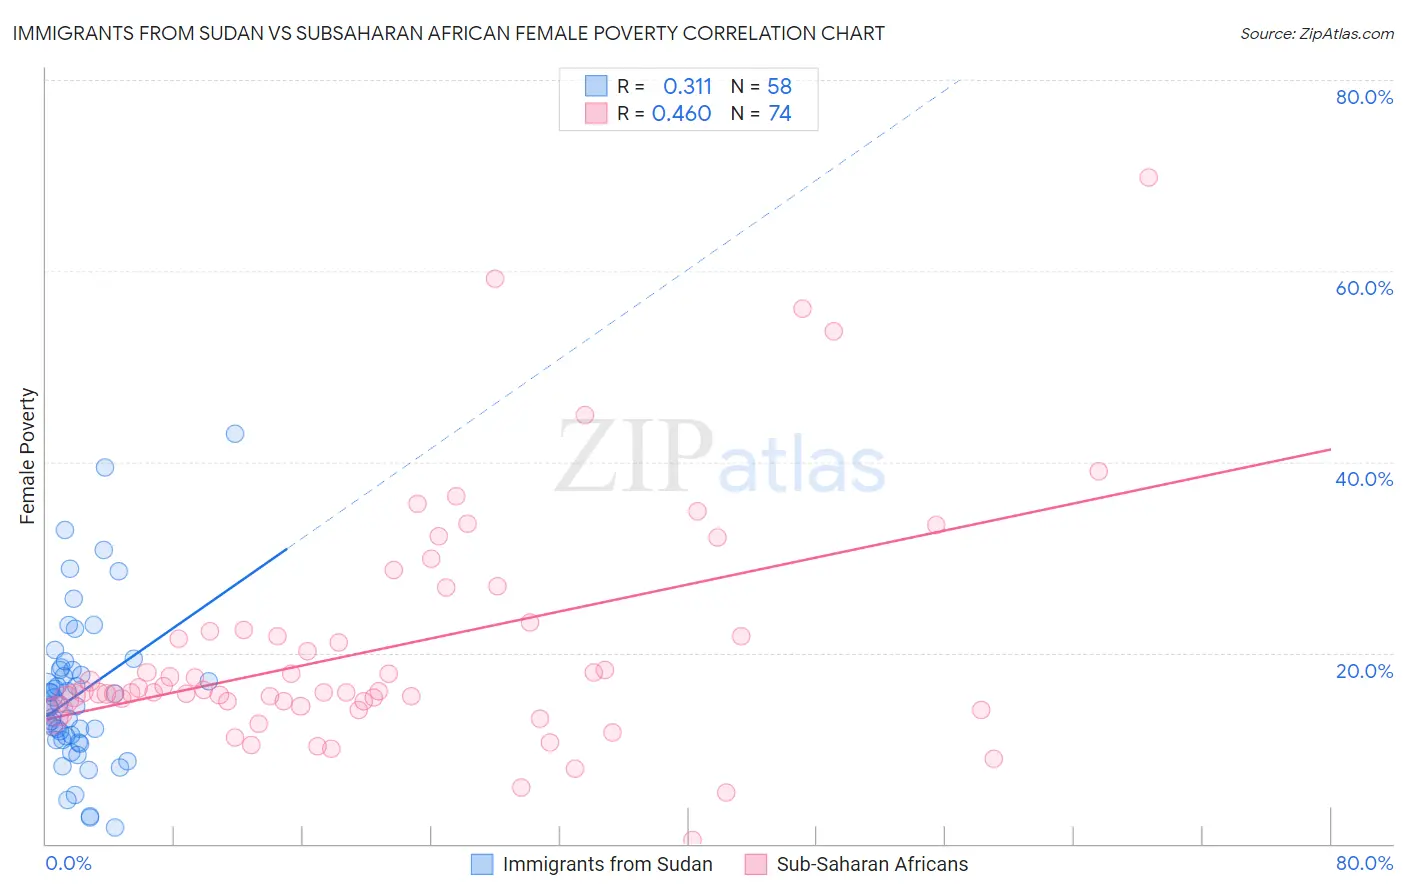 Immigrants from Sudan vs Subsaharan African Female Poverty